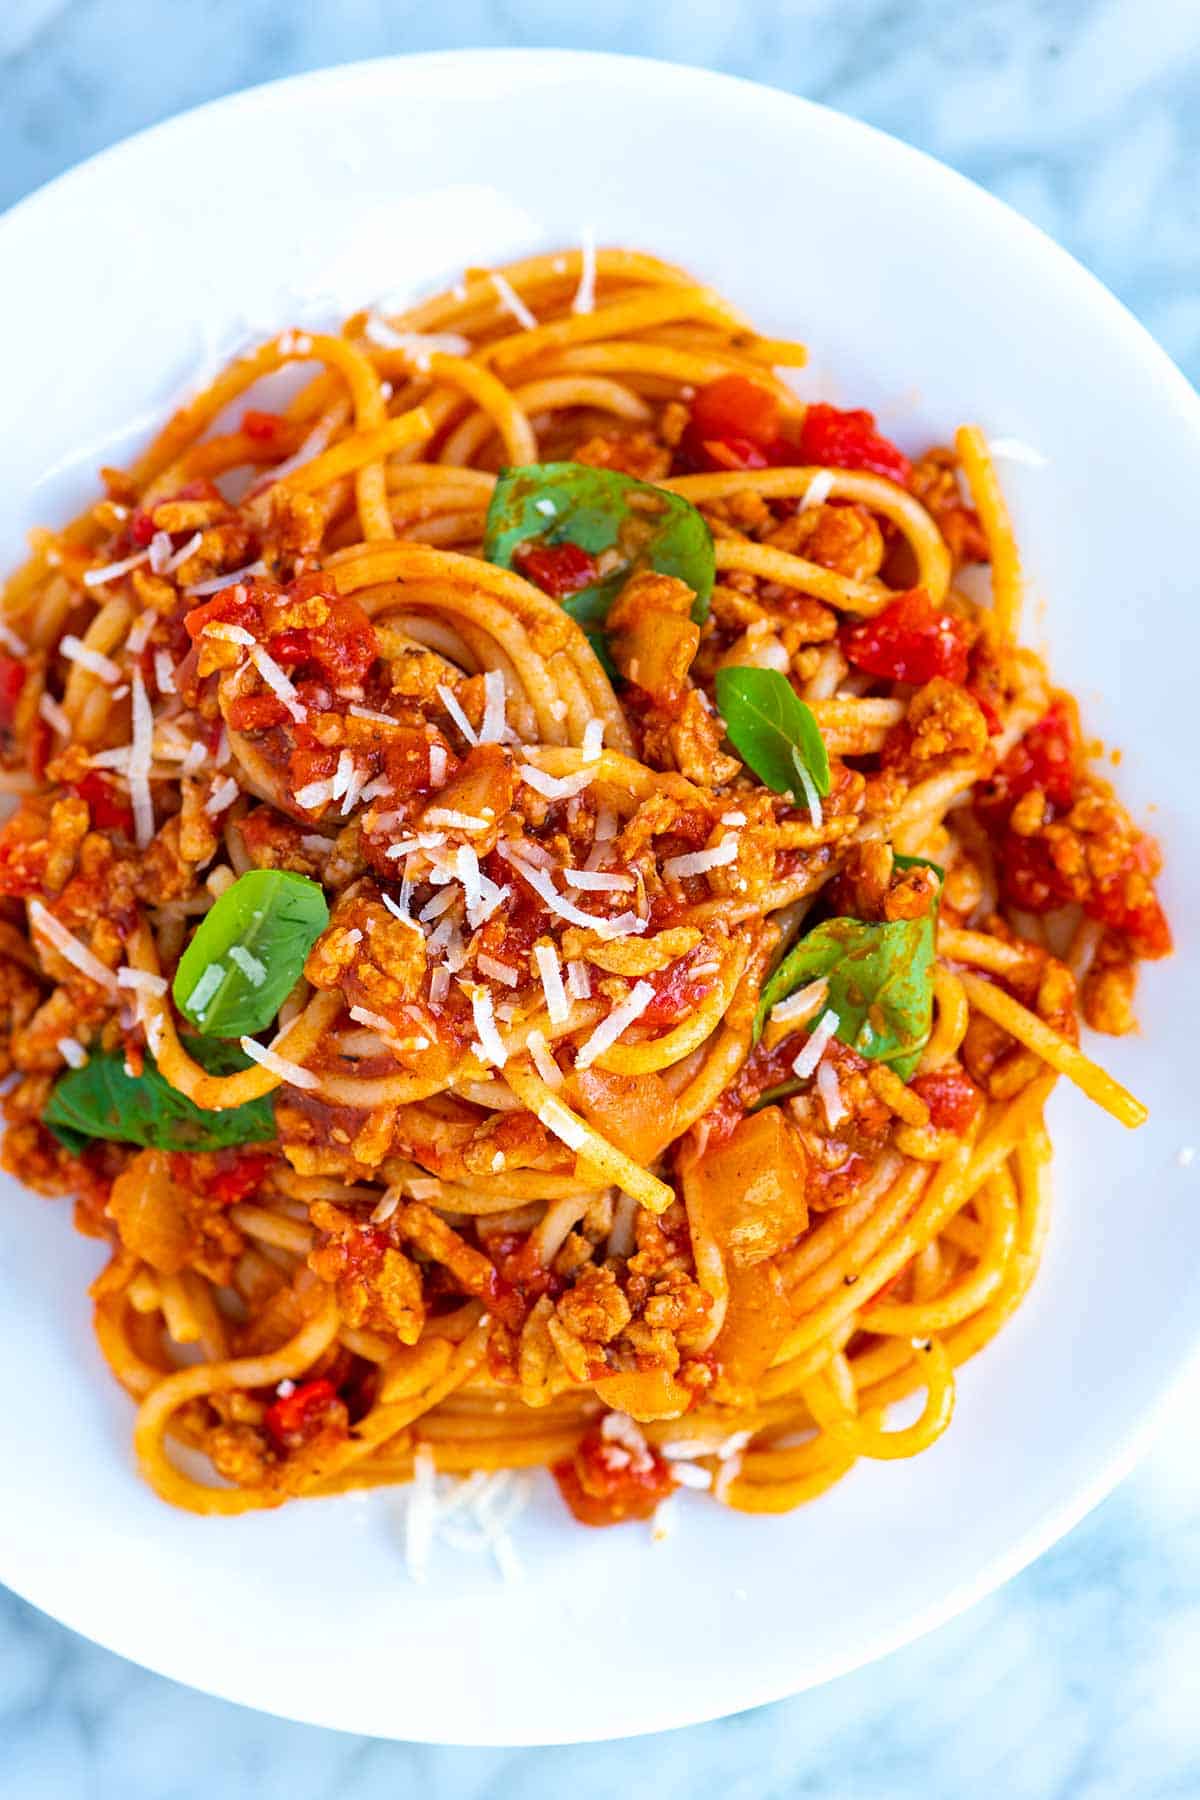 A plate of Spaghetti and Meat Sauce